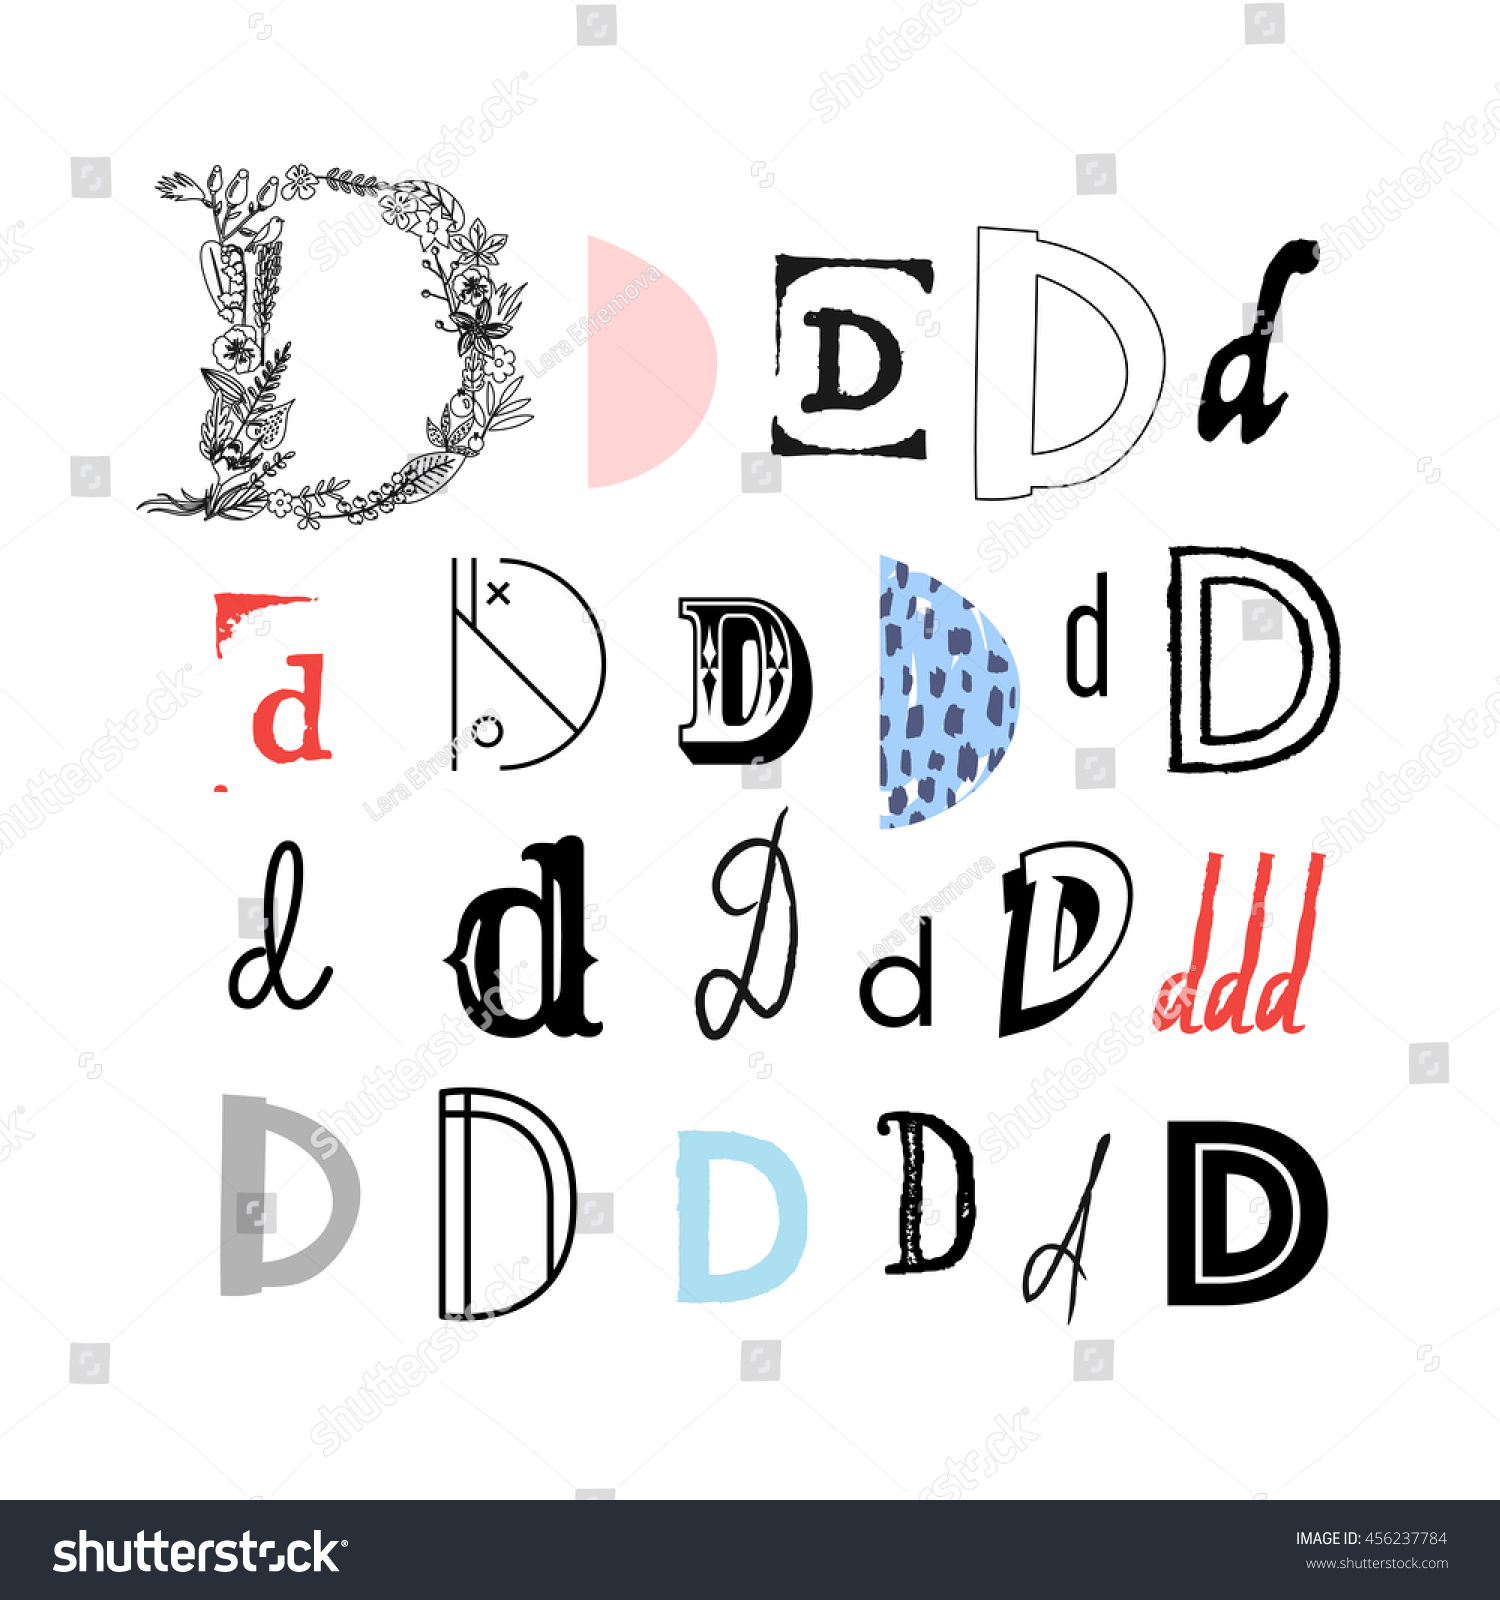 Letter D In Different Styles Gumus Northeastfitness Co